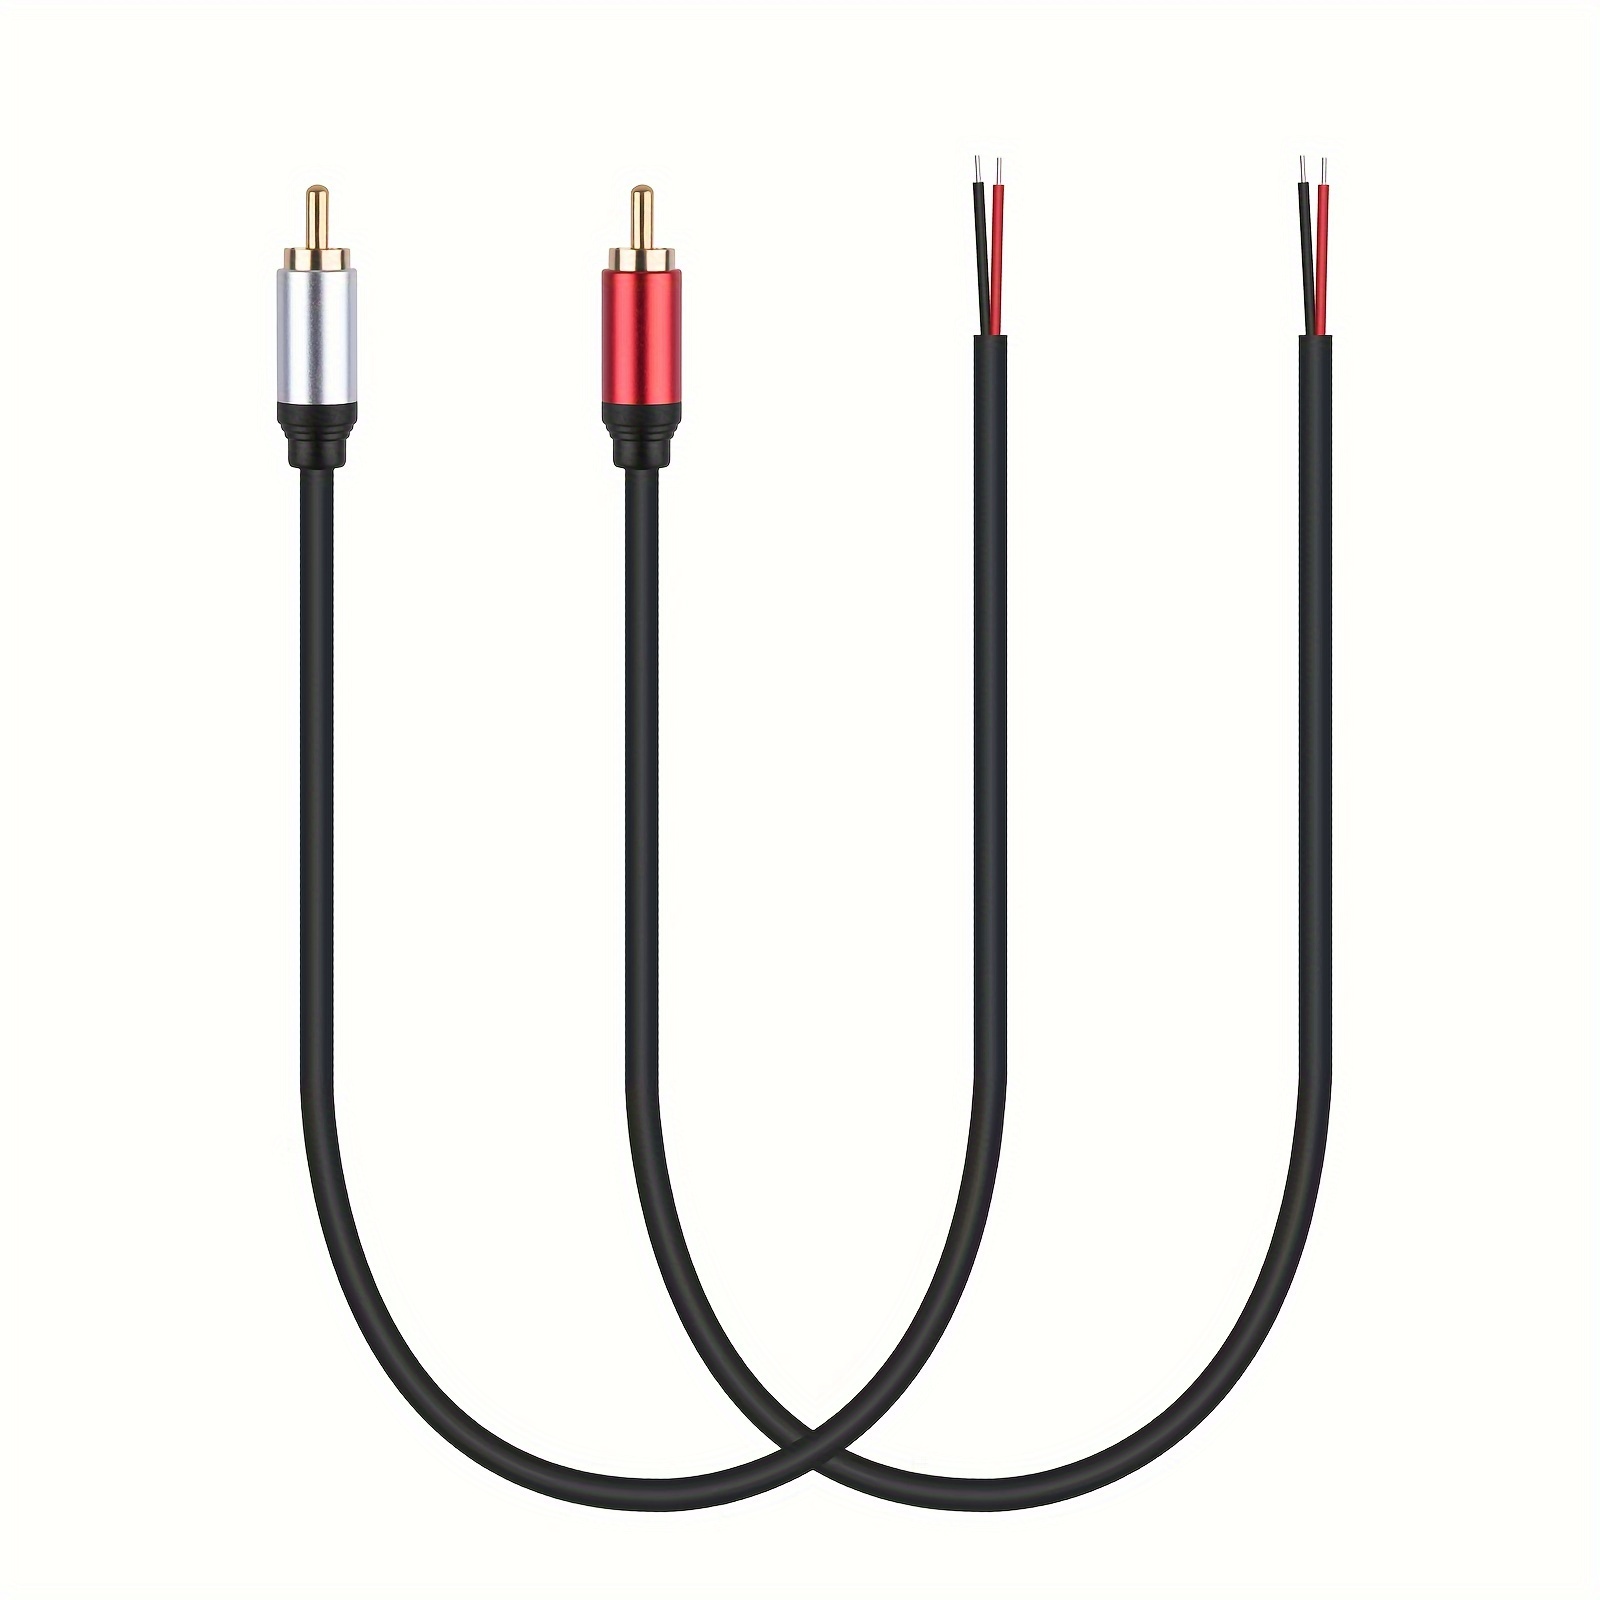 

2 Single-ended Rca Audio Cables, Coaxial Cables For Diy Audio Cables, 30cm Audio Cables With Rca Male Connectors